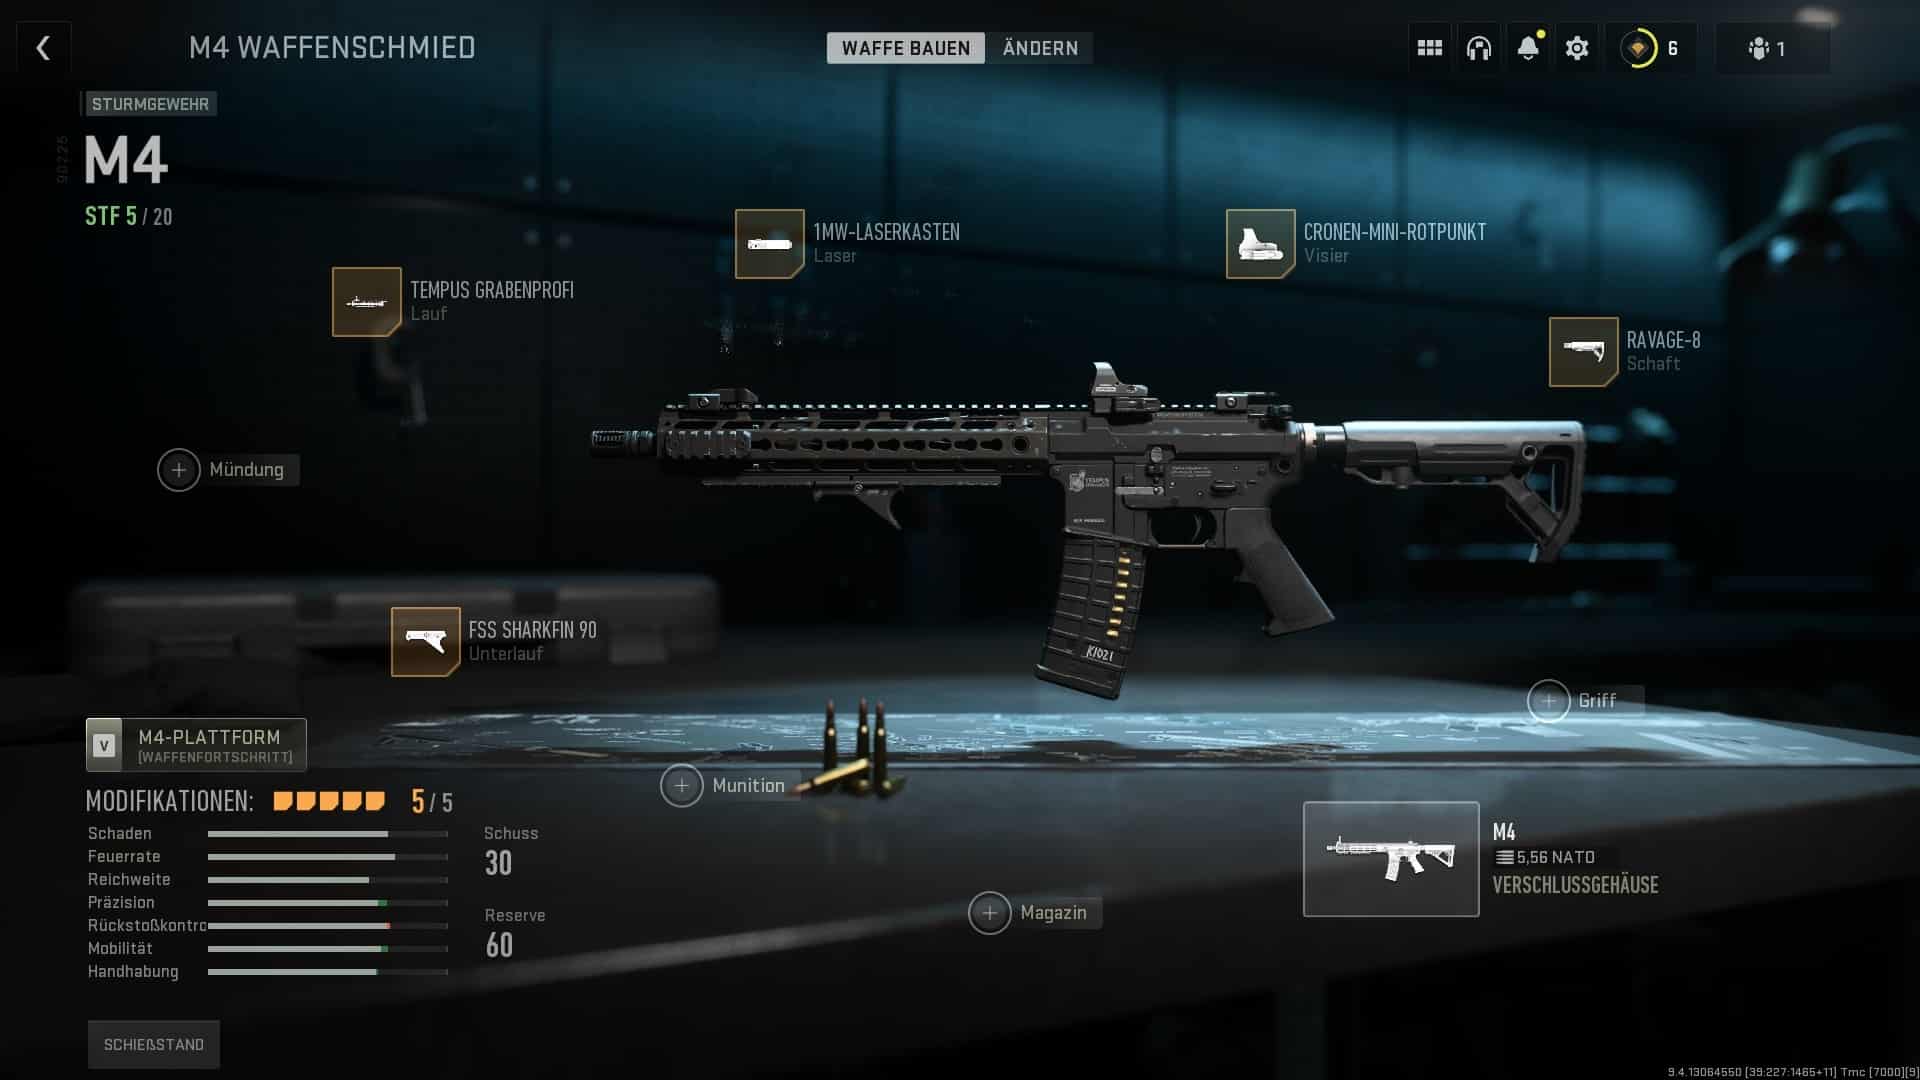 (At least we can see on the bottom left that our weapon has become more accurate and mobile through modifications).